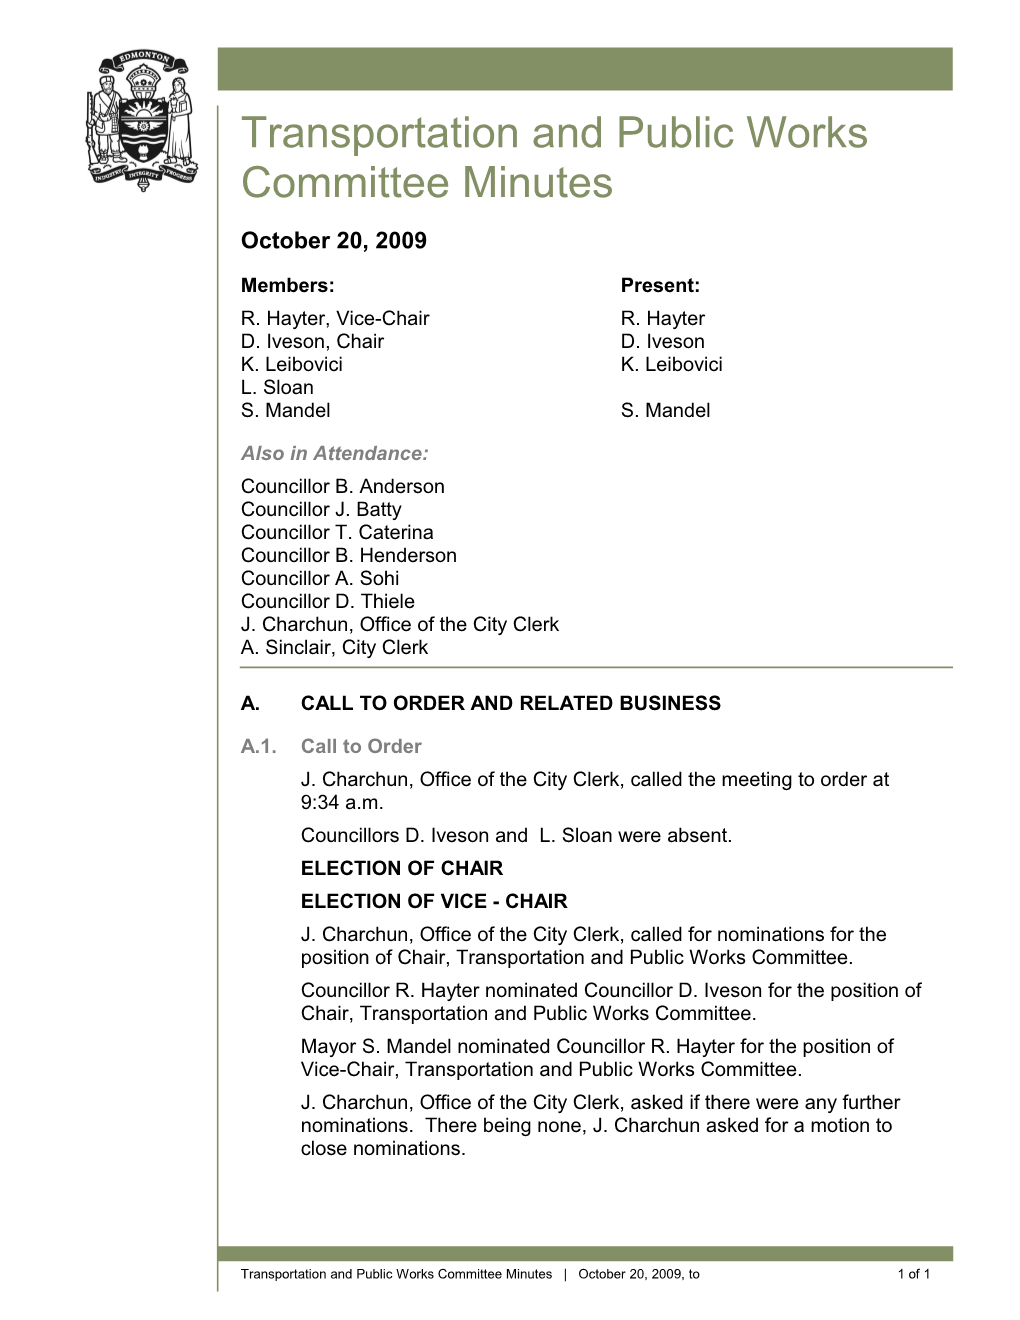 Minutes for Transportation and Public Works Committee October 20, 2009 Meeting